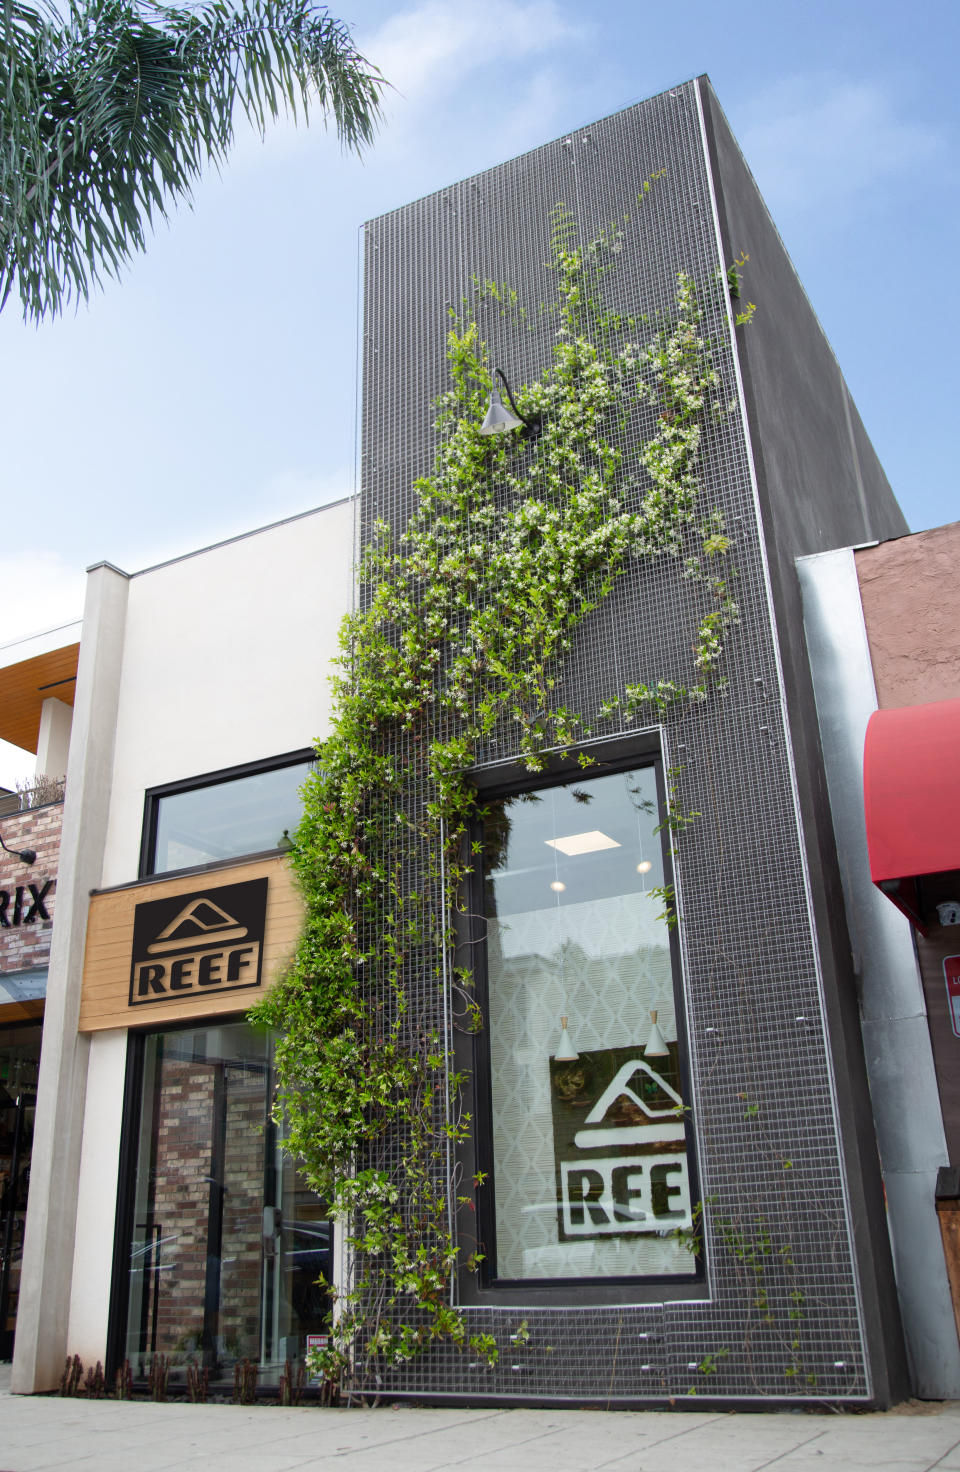 The exterior of the new Reef store in Encinitas, California. Photo by Michael Burke